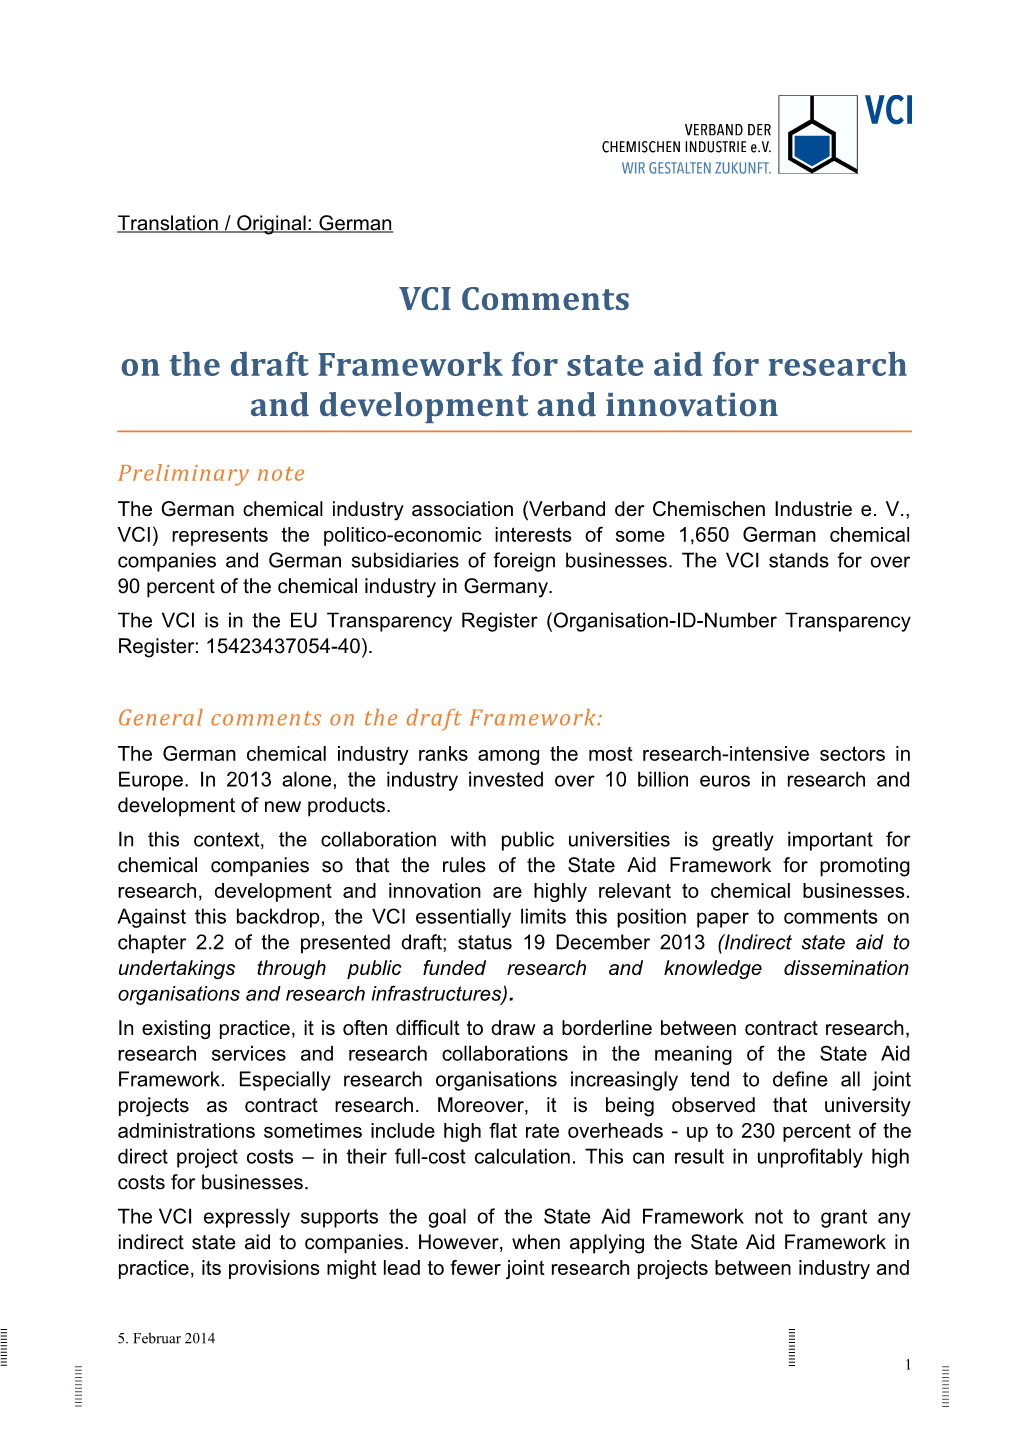 VCI Comments on Draft RD Framework